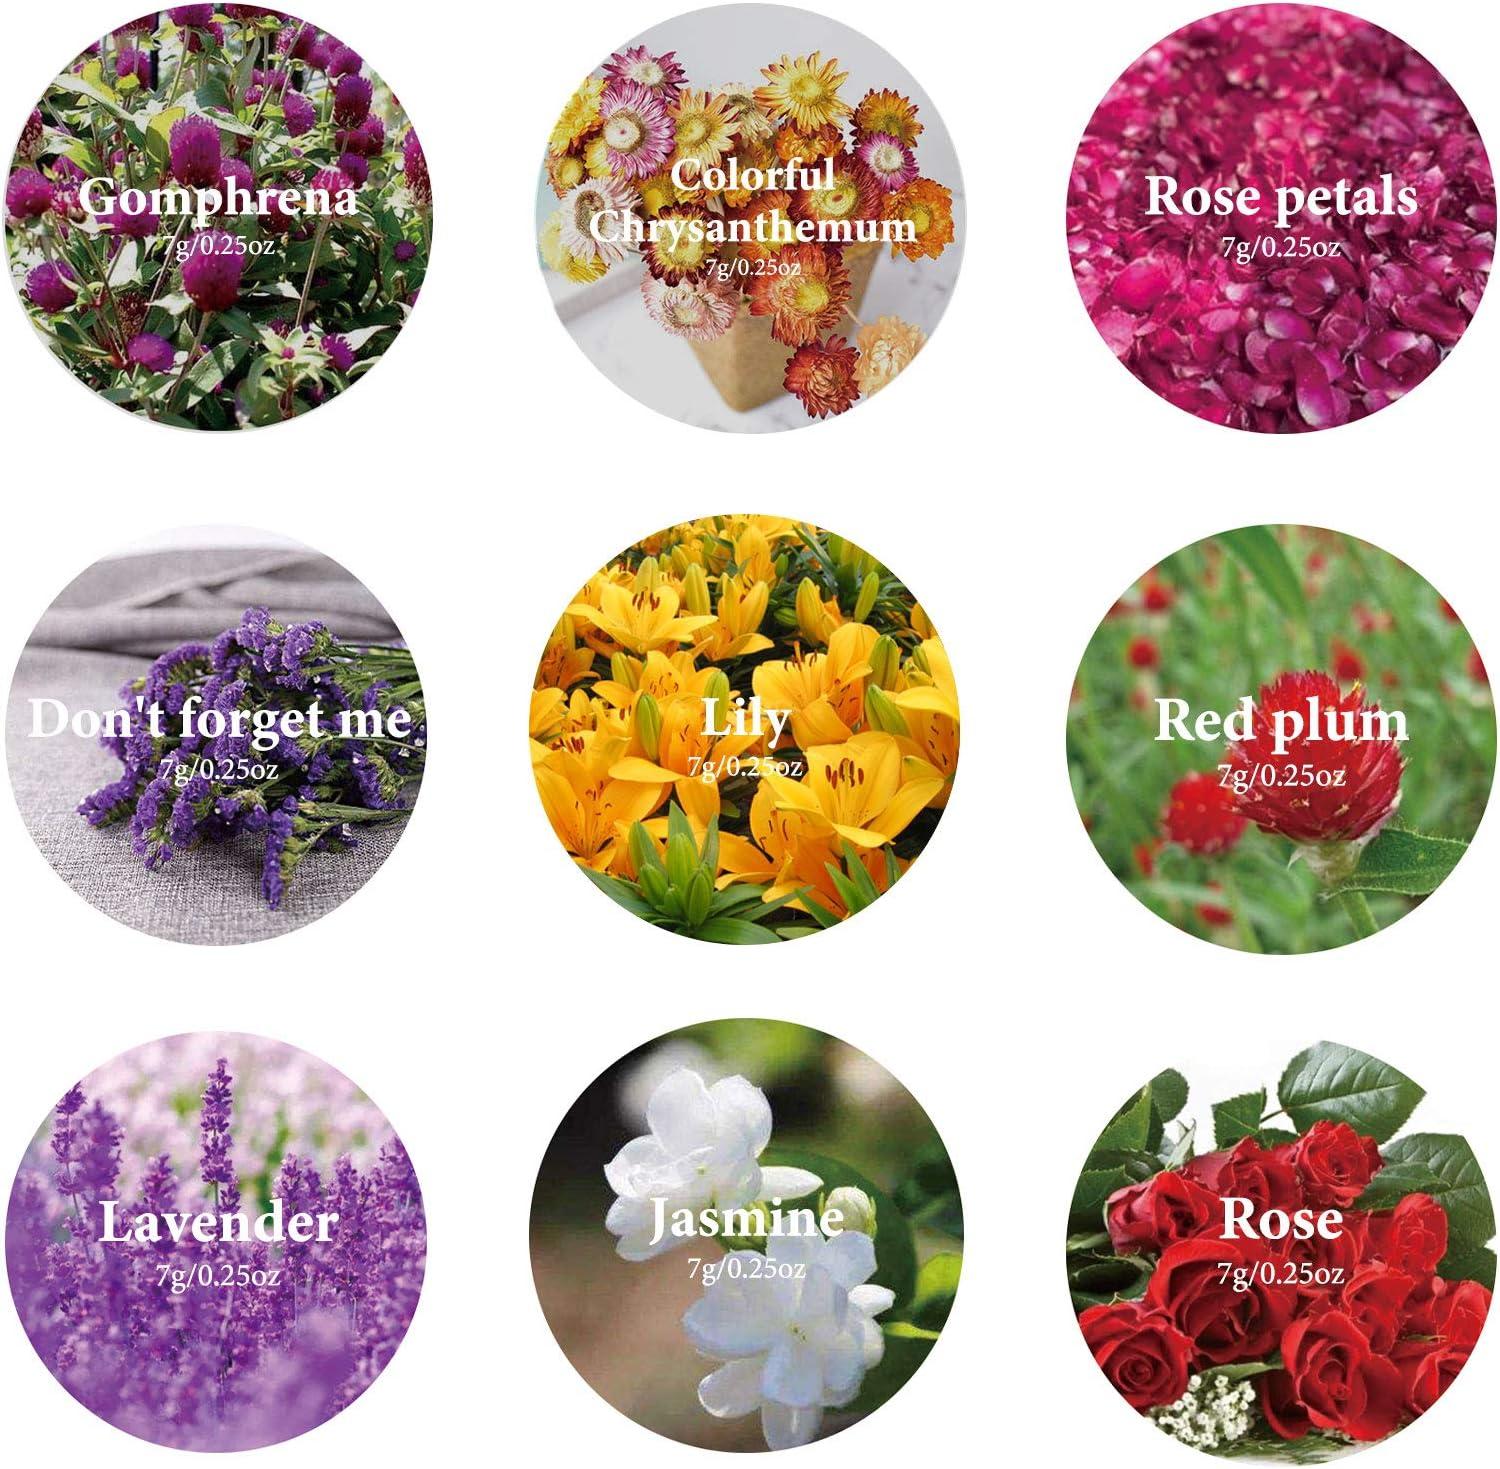 16 Bags Dried Flowers 5g per pack, candle making kit,Natural Dried Flowers  Herbs Kit for Soap Making, DIY Candle Making,dried flowers for crafts,Bath  - soap making supplies,Include Rose Petals,Lavender,Don't Forget  Me,Lilium,Jasmine,Rosebudsand More